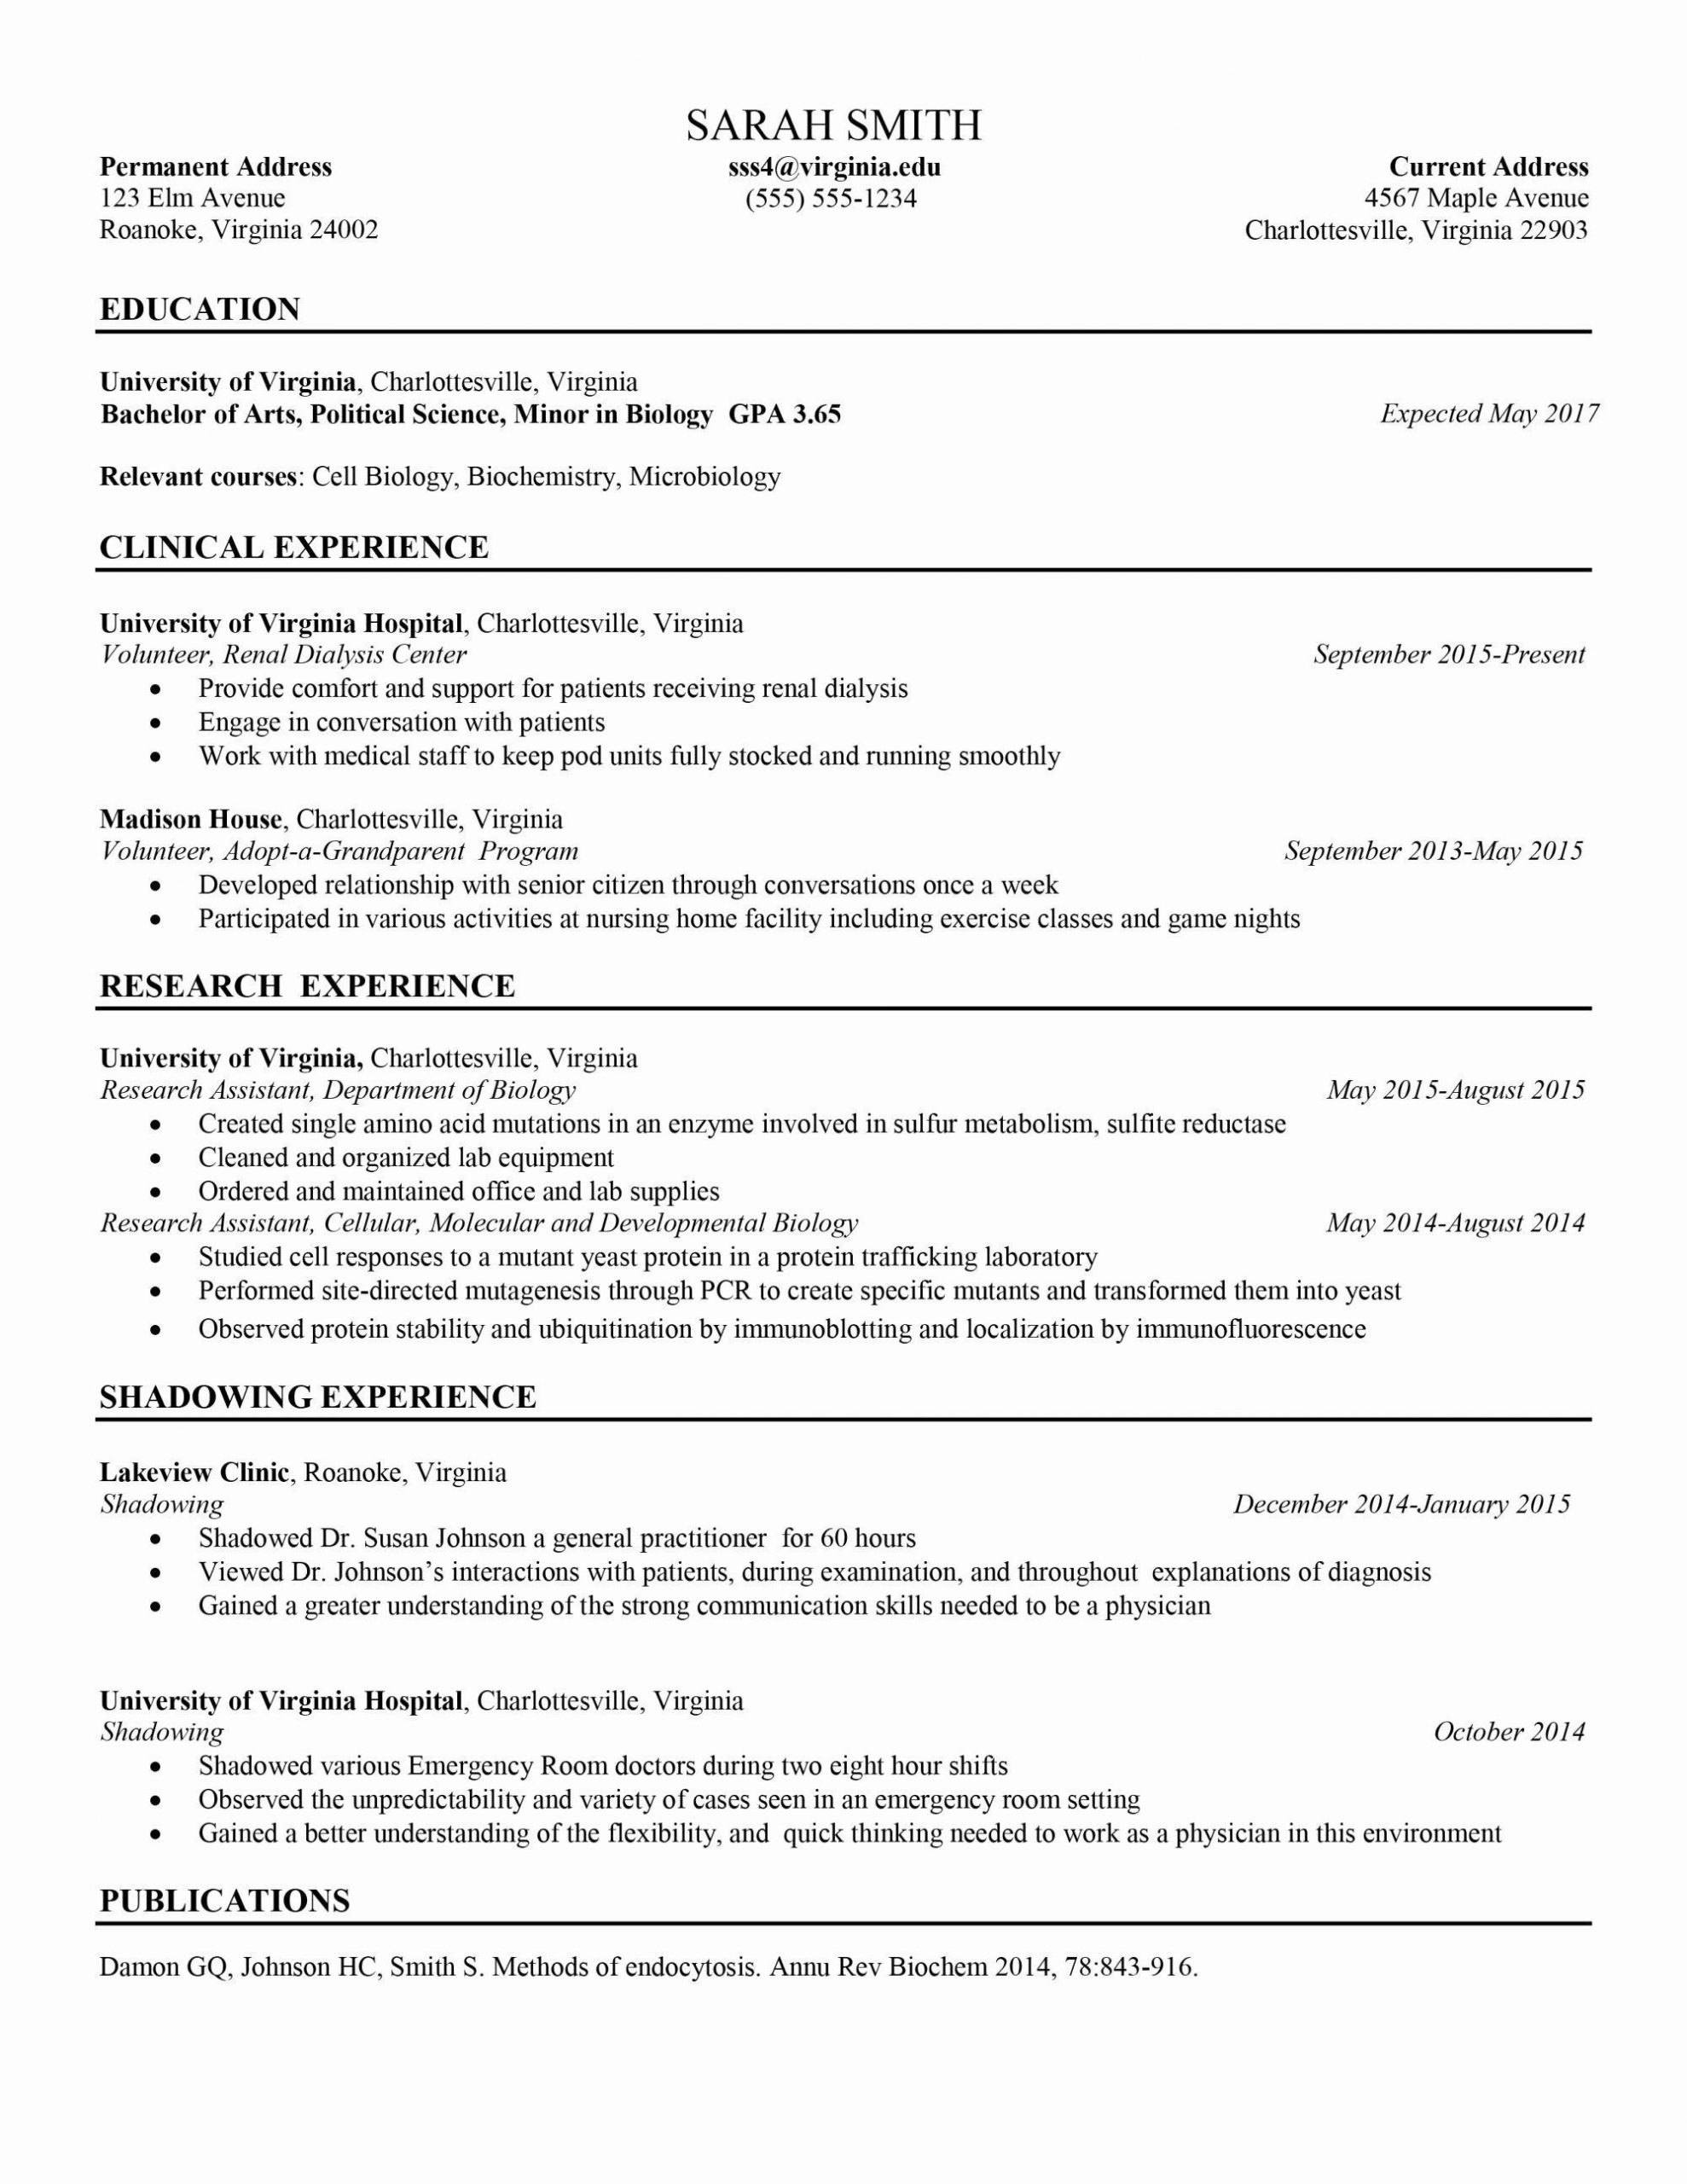 32 Awesome Entry Level Nurse Practitioner Resume in 2020